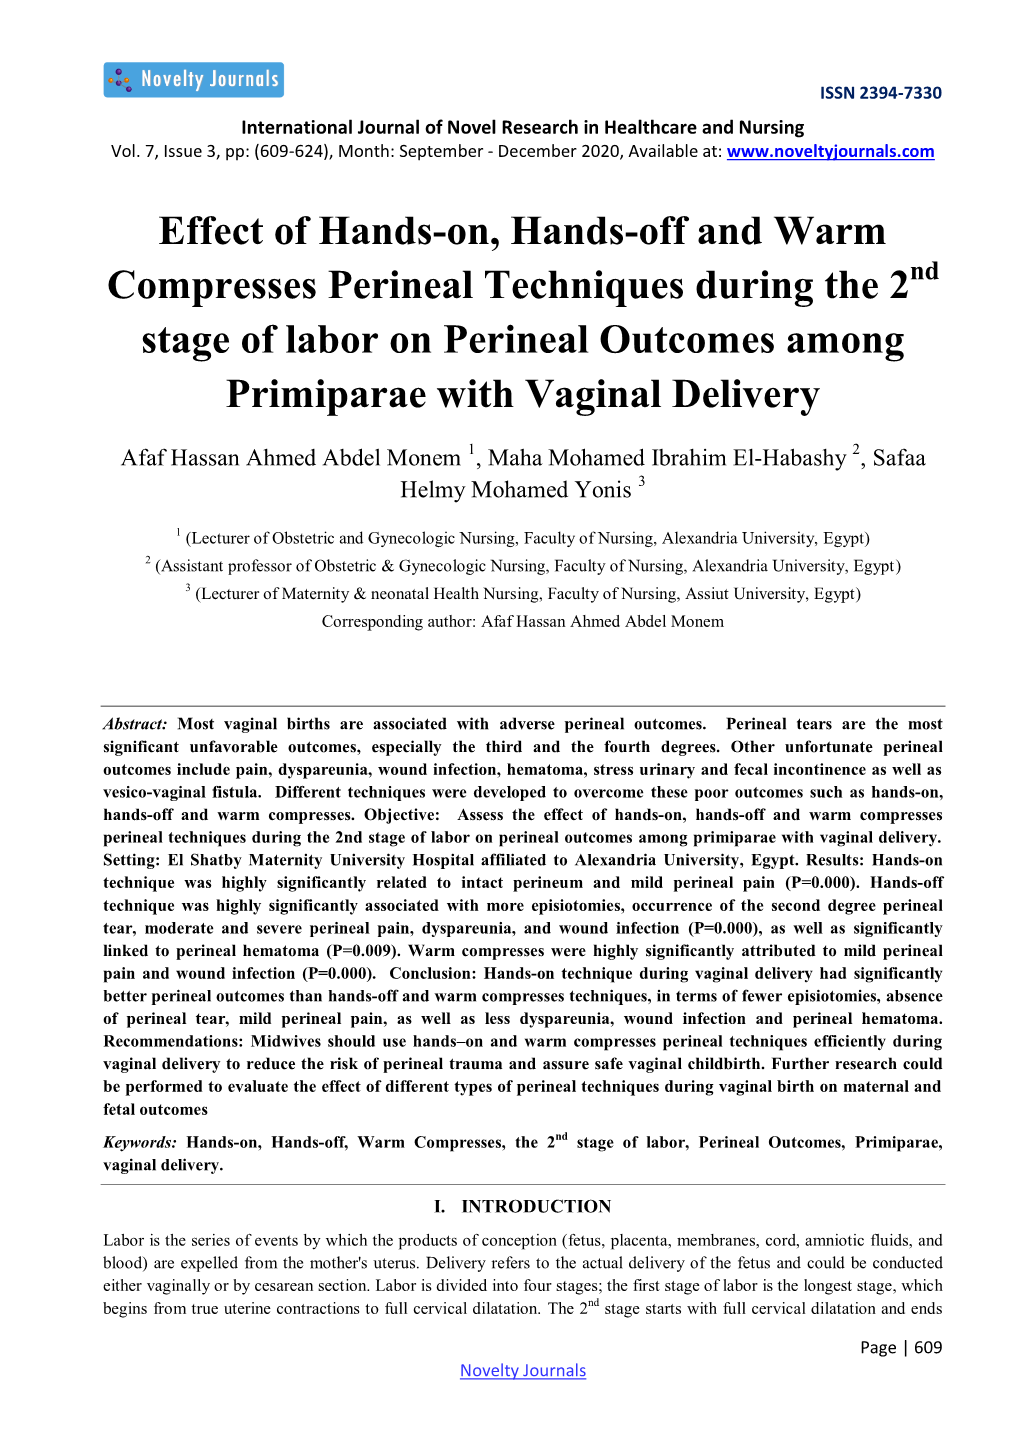 Effect of Hands-On, Hands-Off and Warm Compresses Perineal Techniques During the 2Nd Stage of Labor on Perineal Outcomes Among Primiparae with Vaginal Delivery